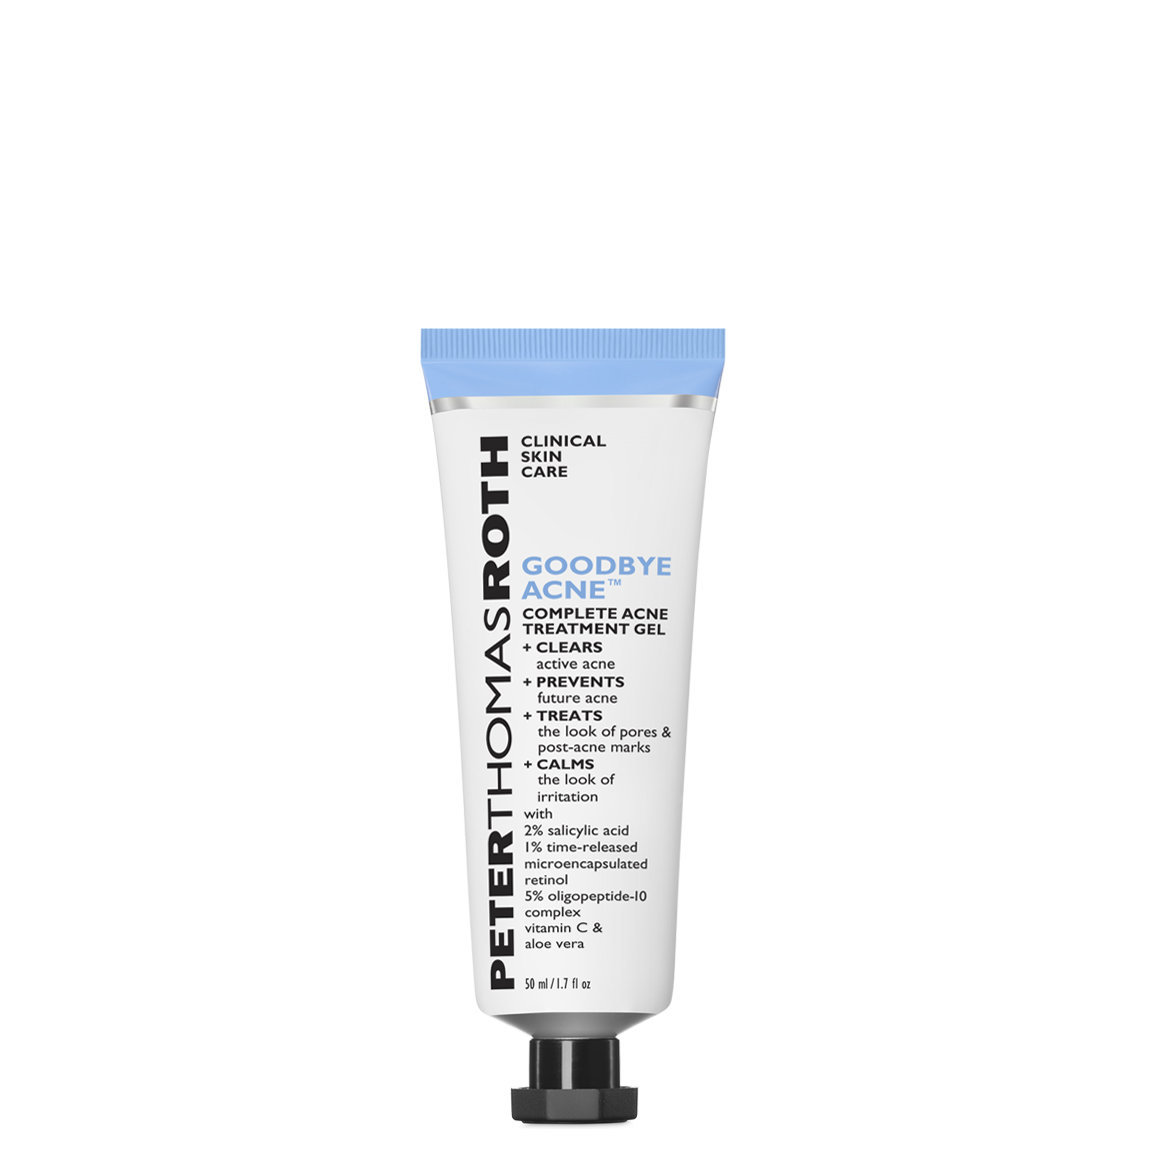 Peter Thomas Roth Goodbye Acne Complete Acne Treatment Gel alternative view 1 - product swatch.